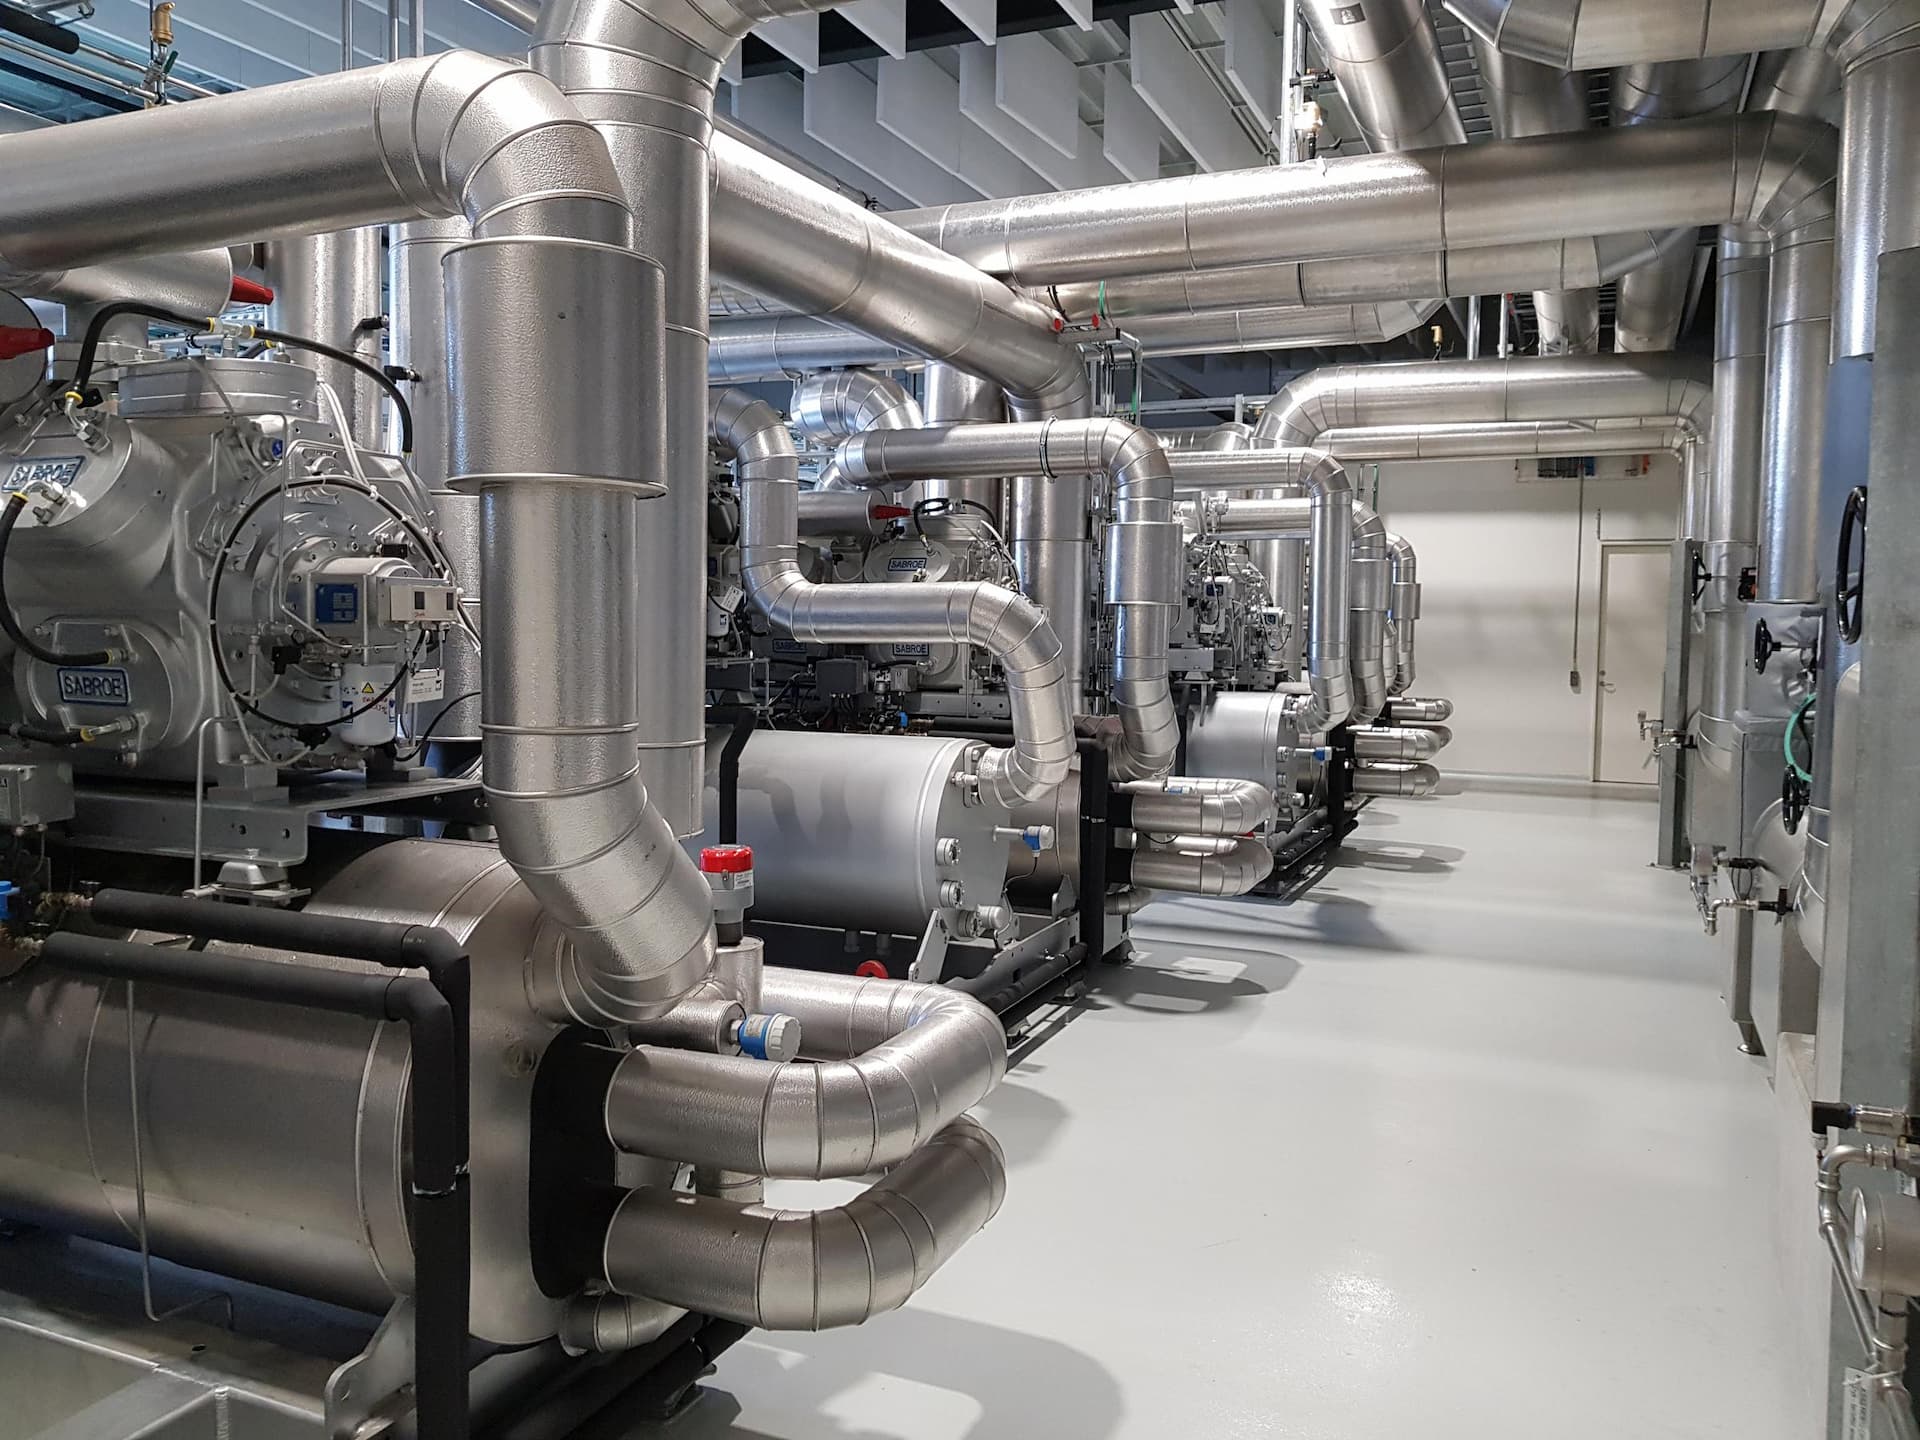 Heat pumps at Taarnby energy center